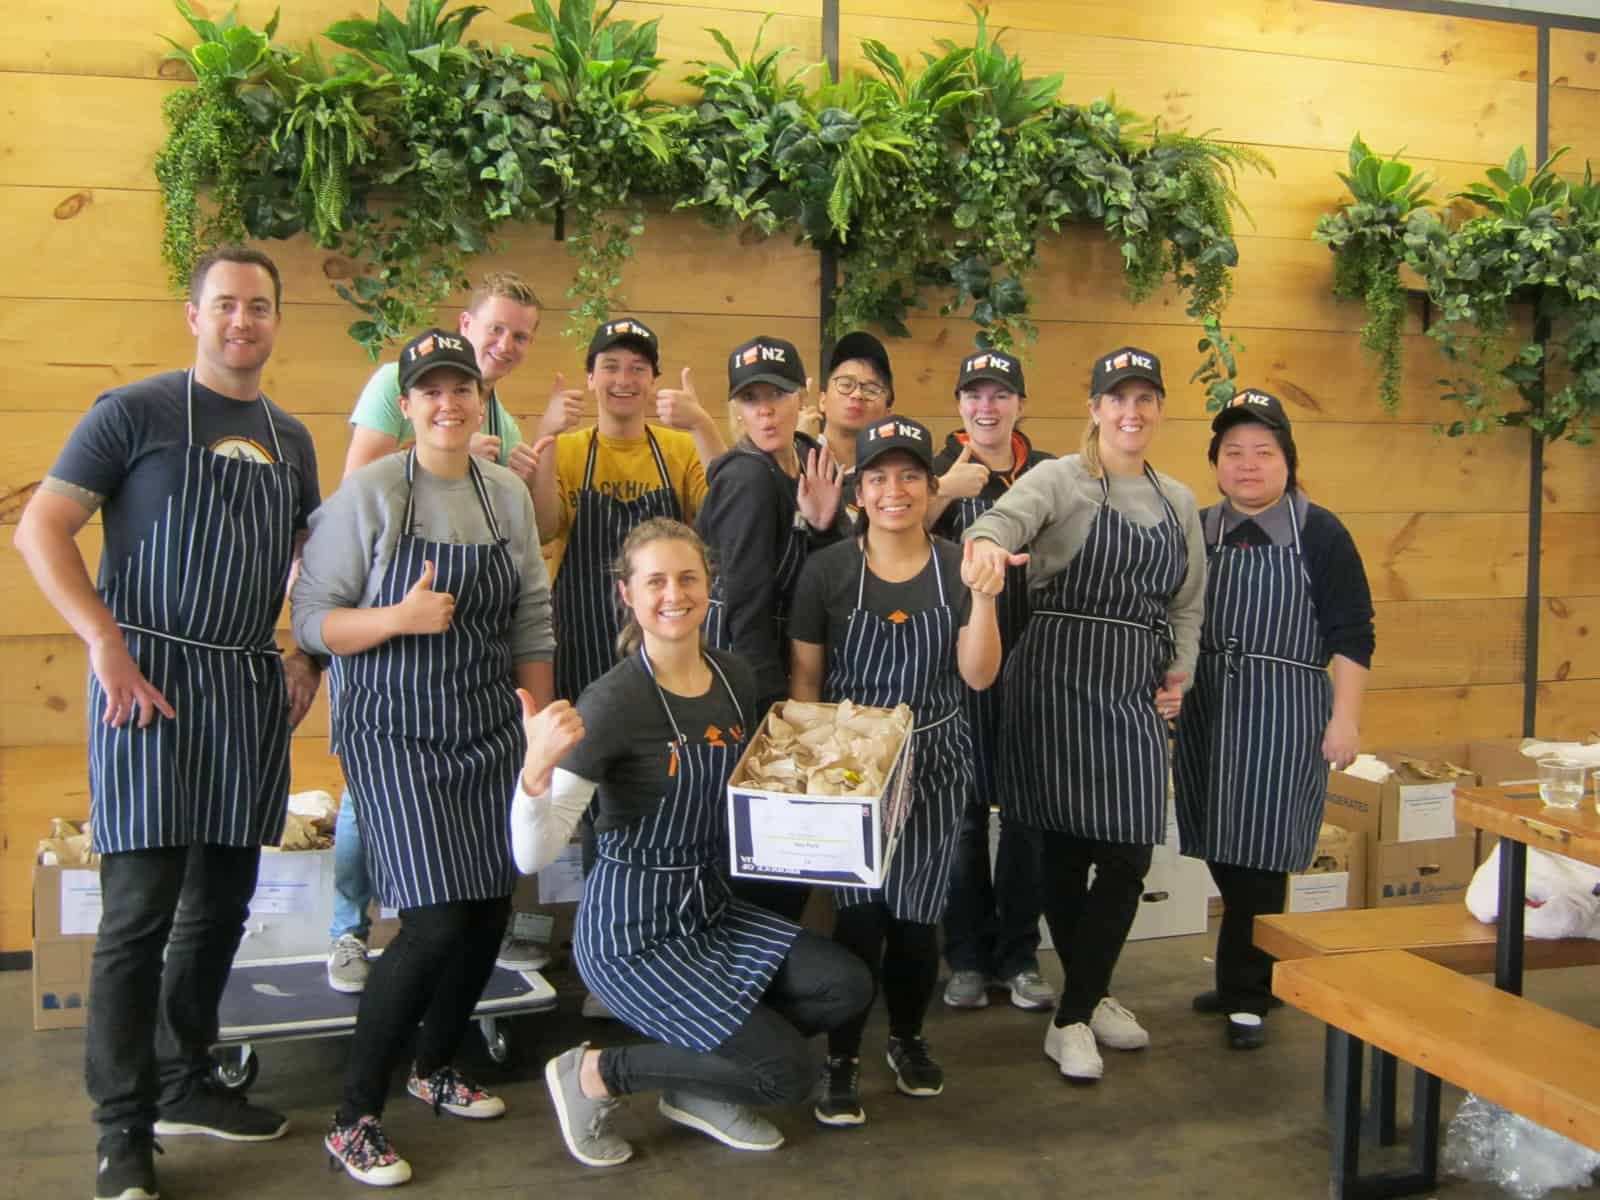 Stray staff volunteering at Eat My Lunch